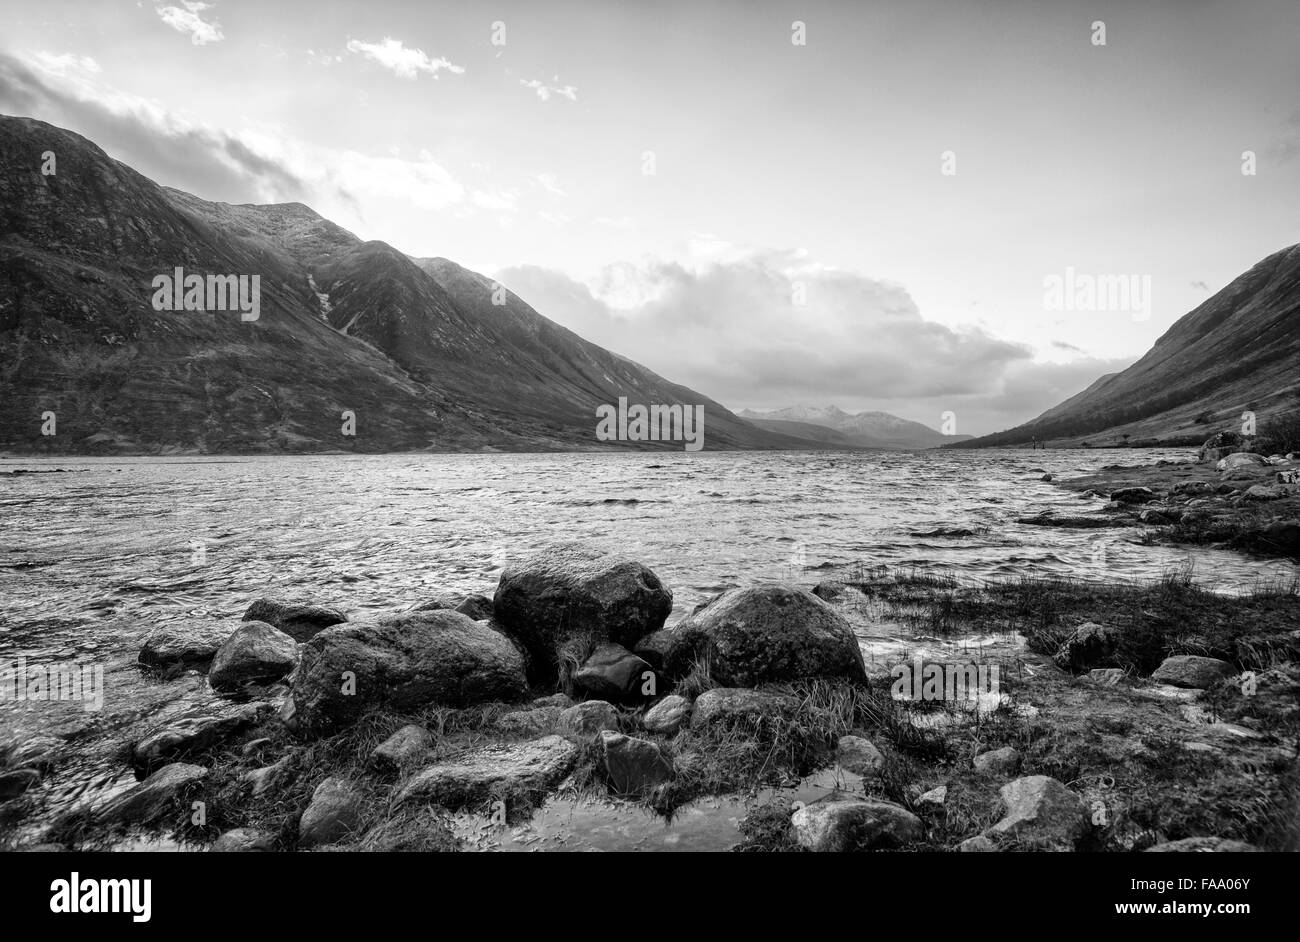 Winter loch etive Black and White Stock Photos & Images - Alamy